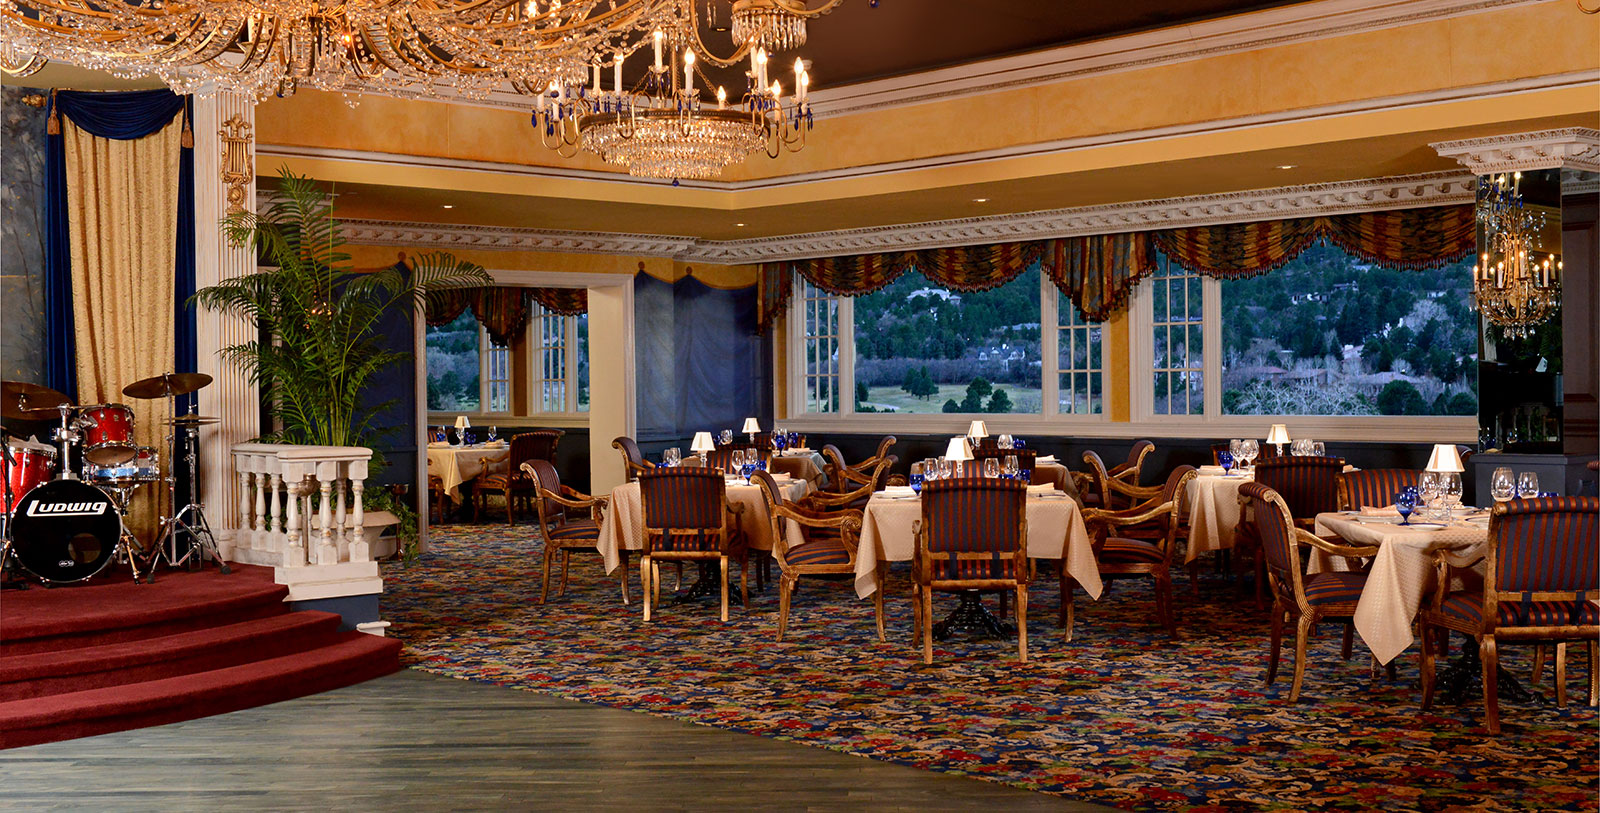 Taste delicious fare at Colorado's only Forbes Five Star, AAA Five Diamond Penrose Room.